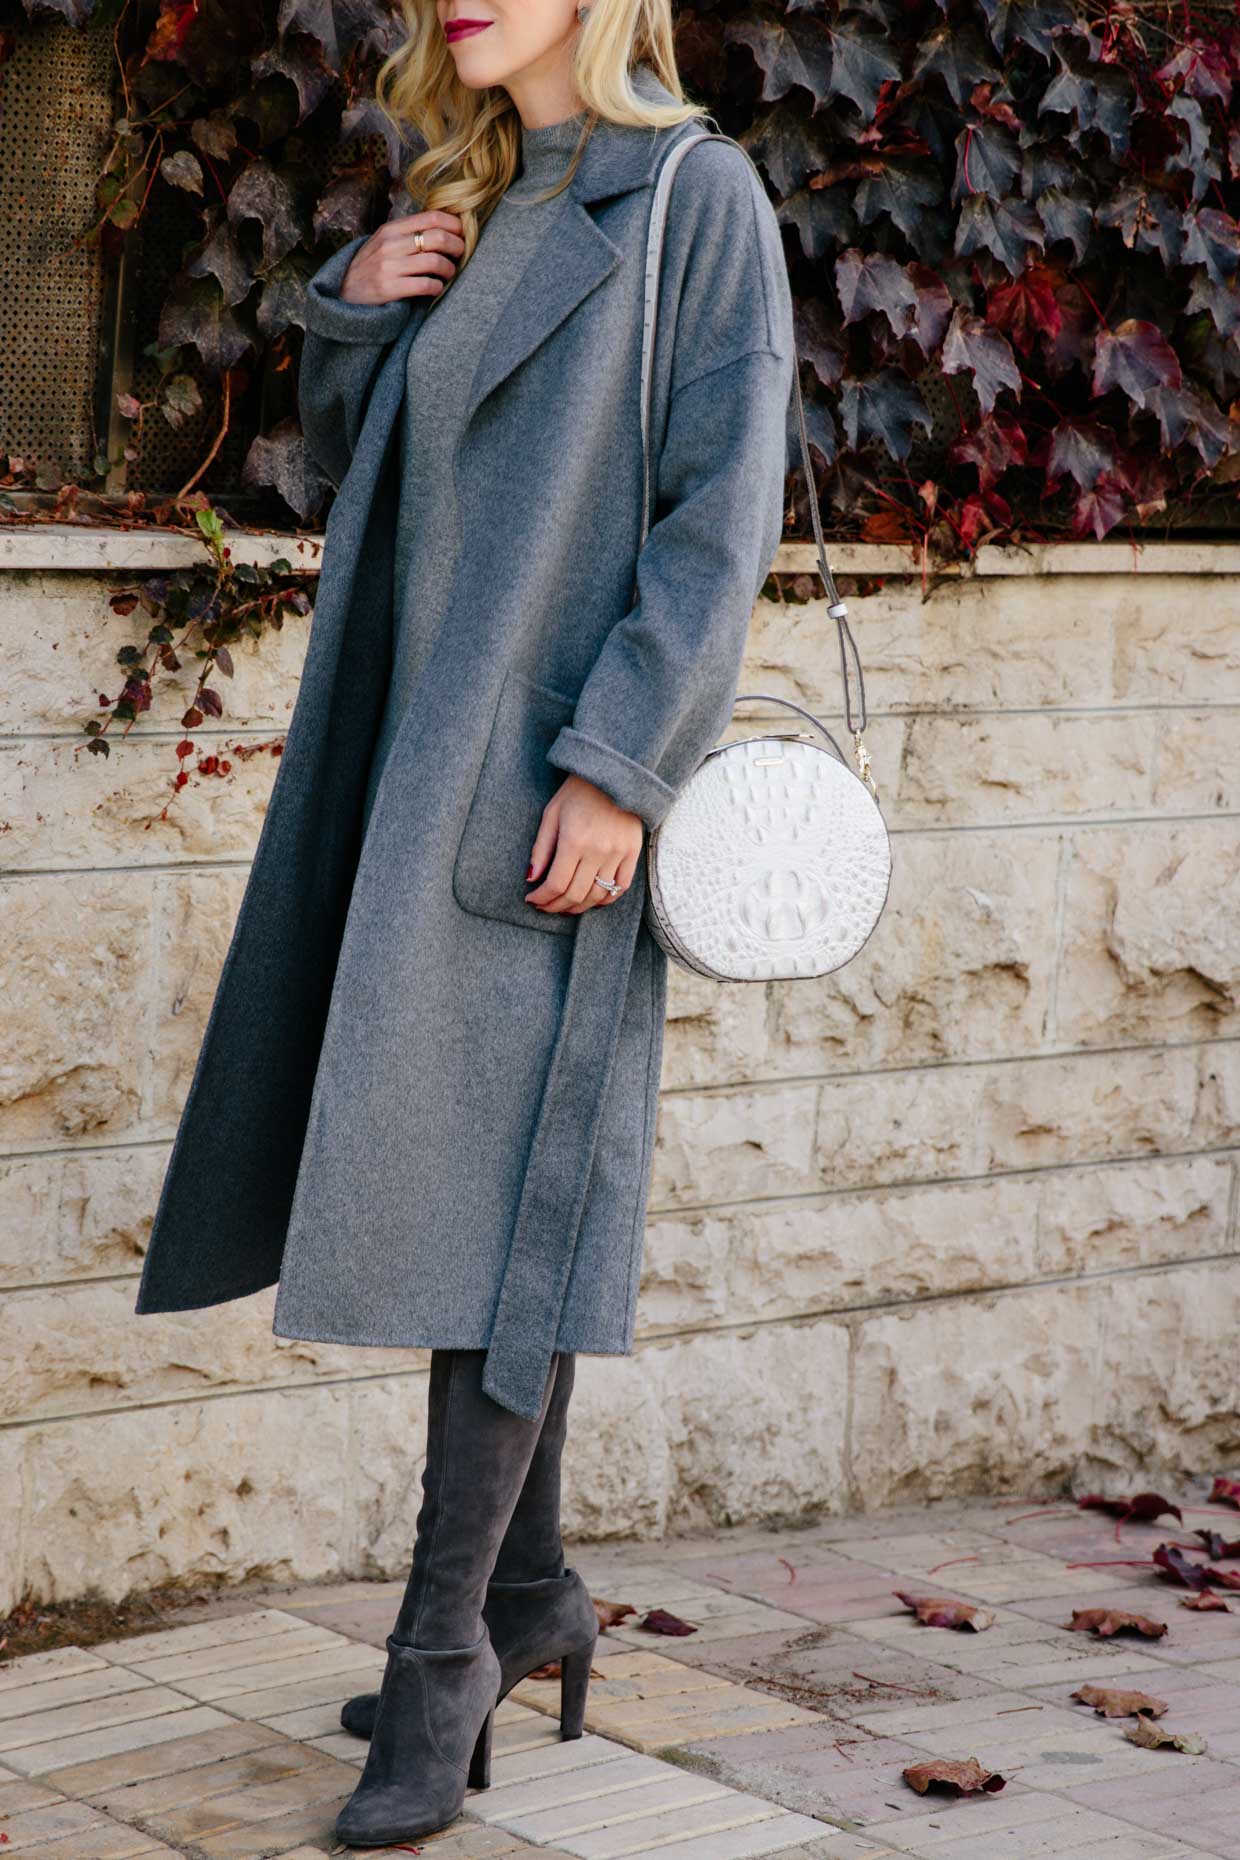 Wrapped Up: Camel cape, Sweater dress & Ankle boots} - Meagan's Moda